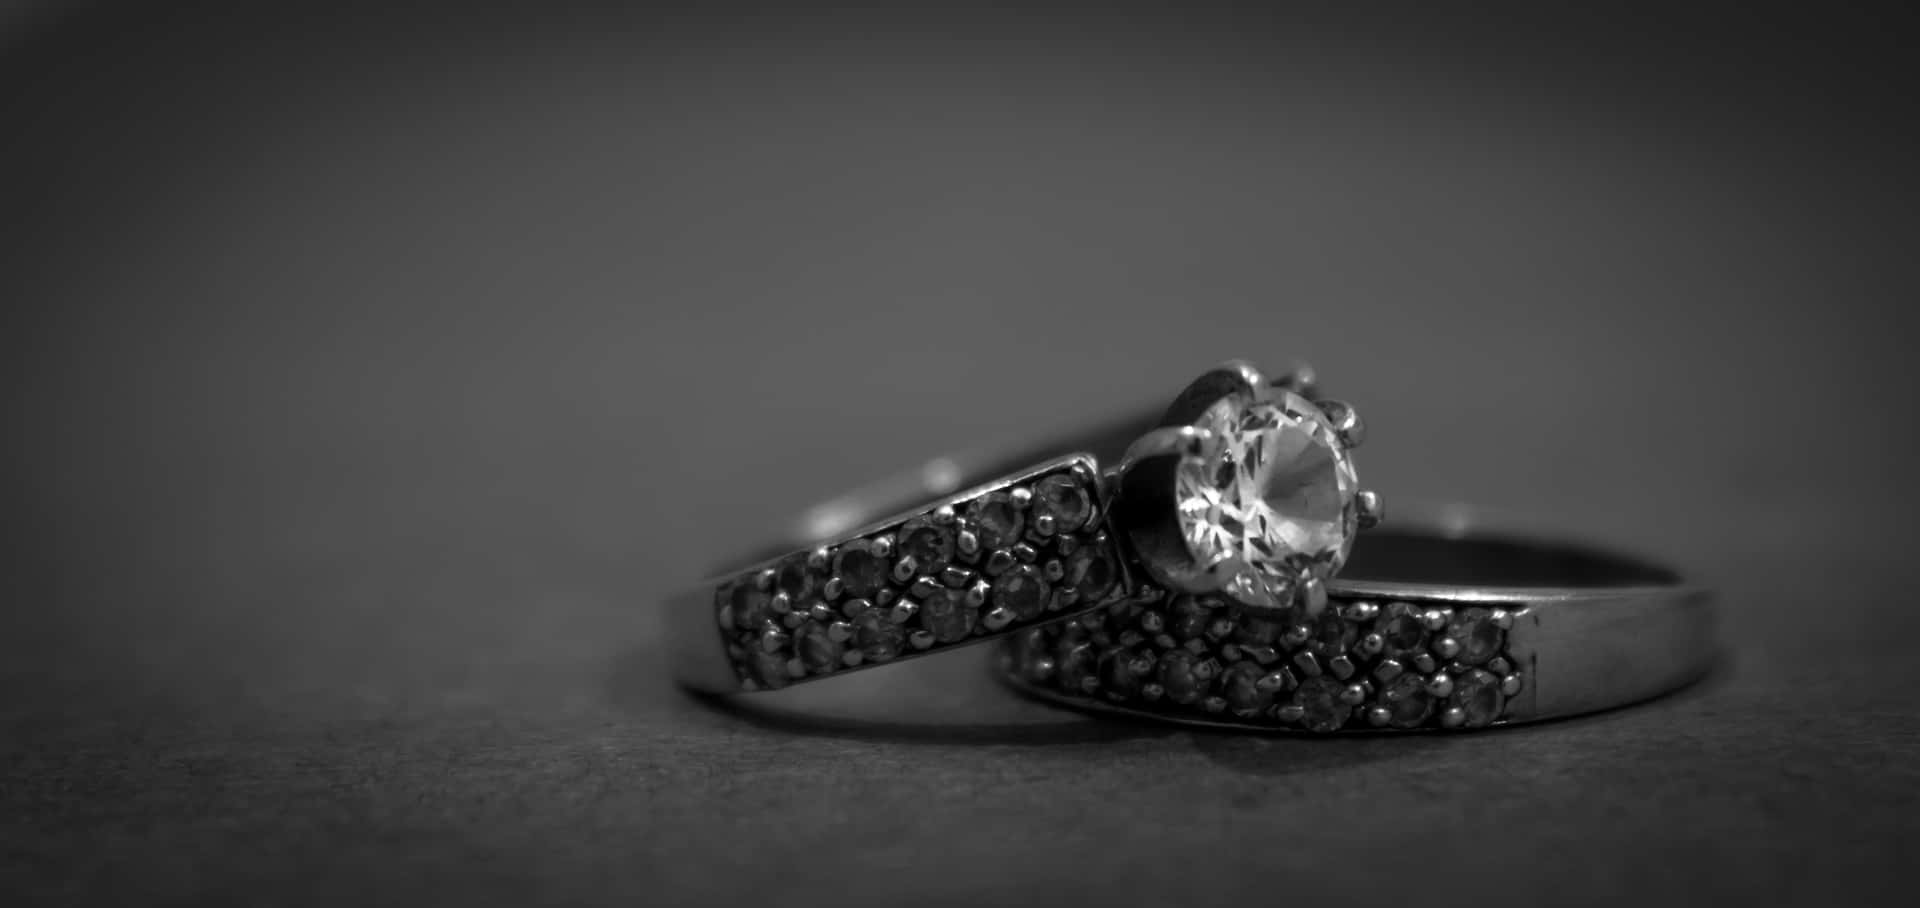 Prince and Princess Wedding Rings that complete the perfect fairy tale.